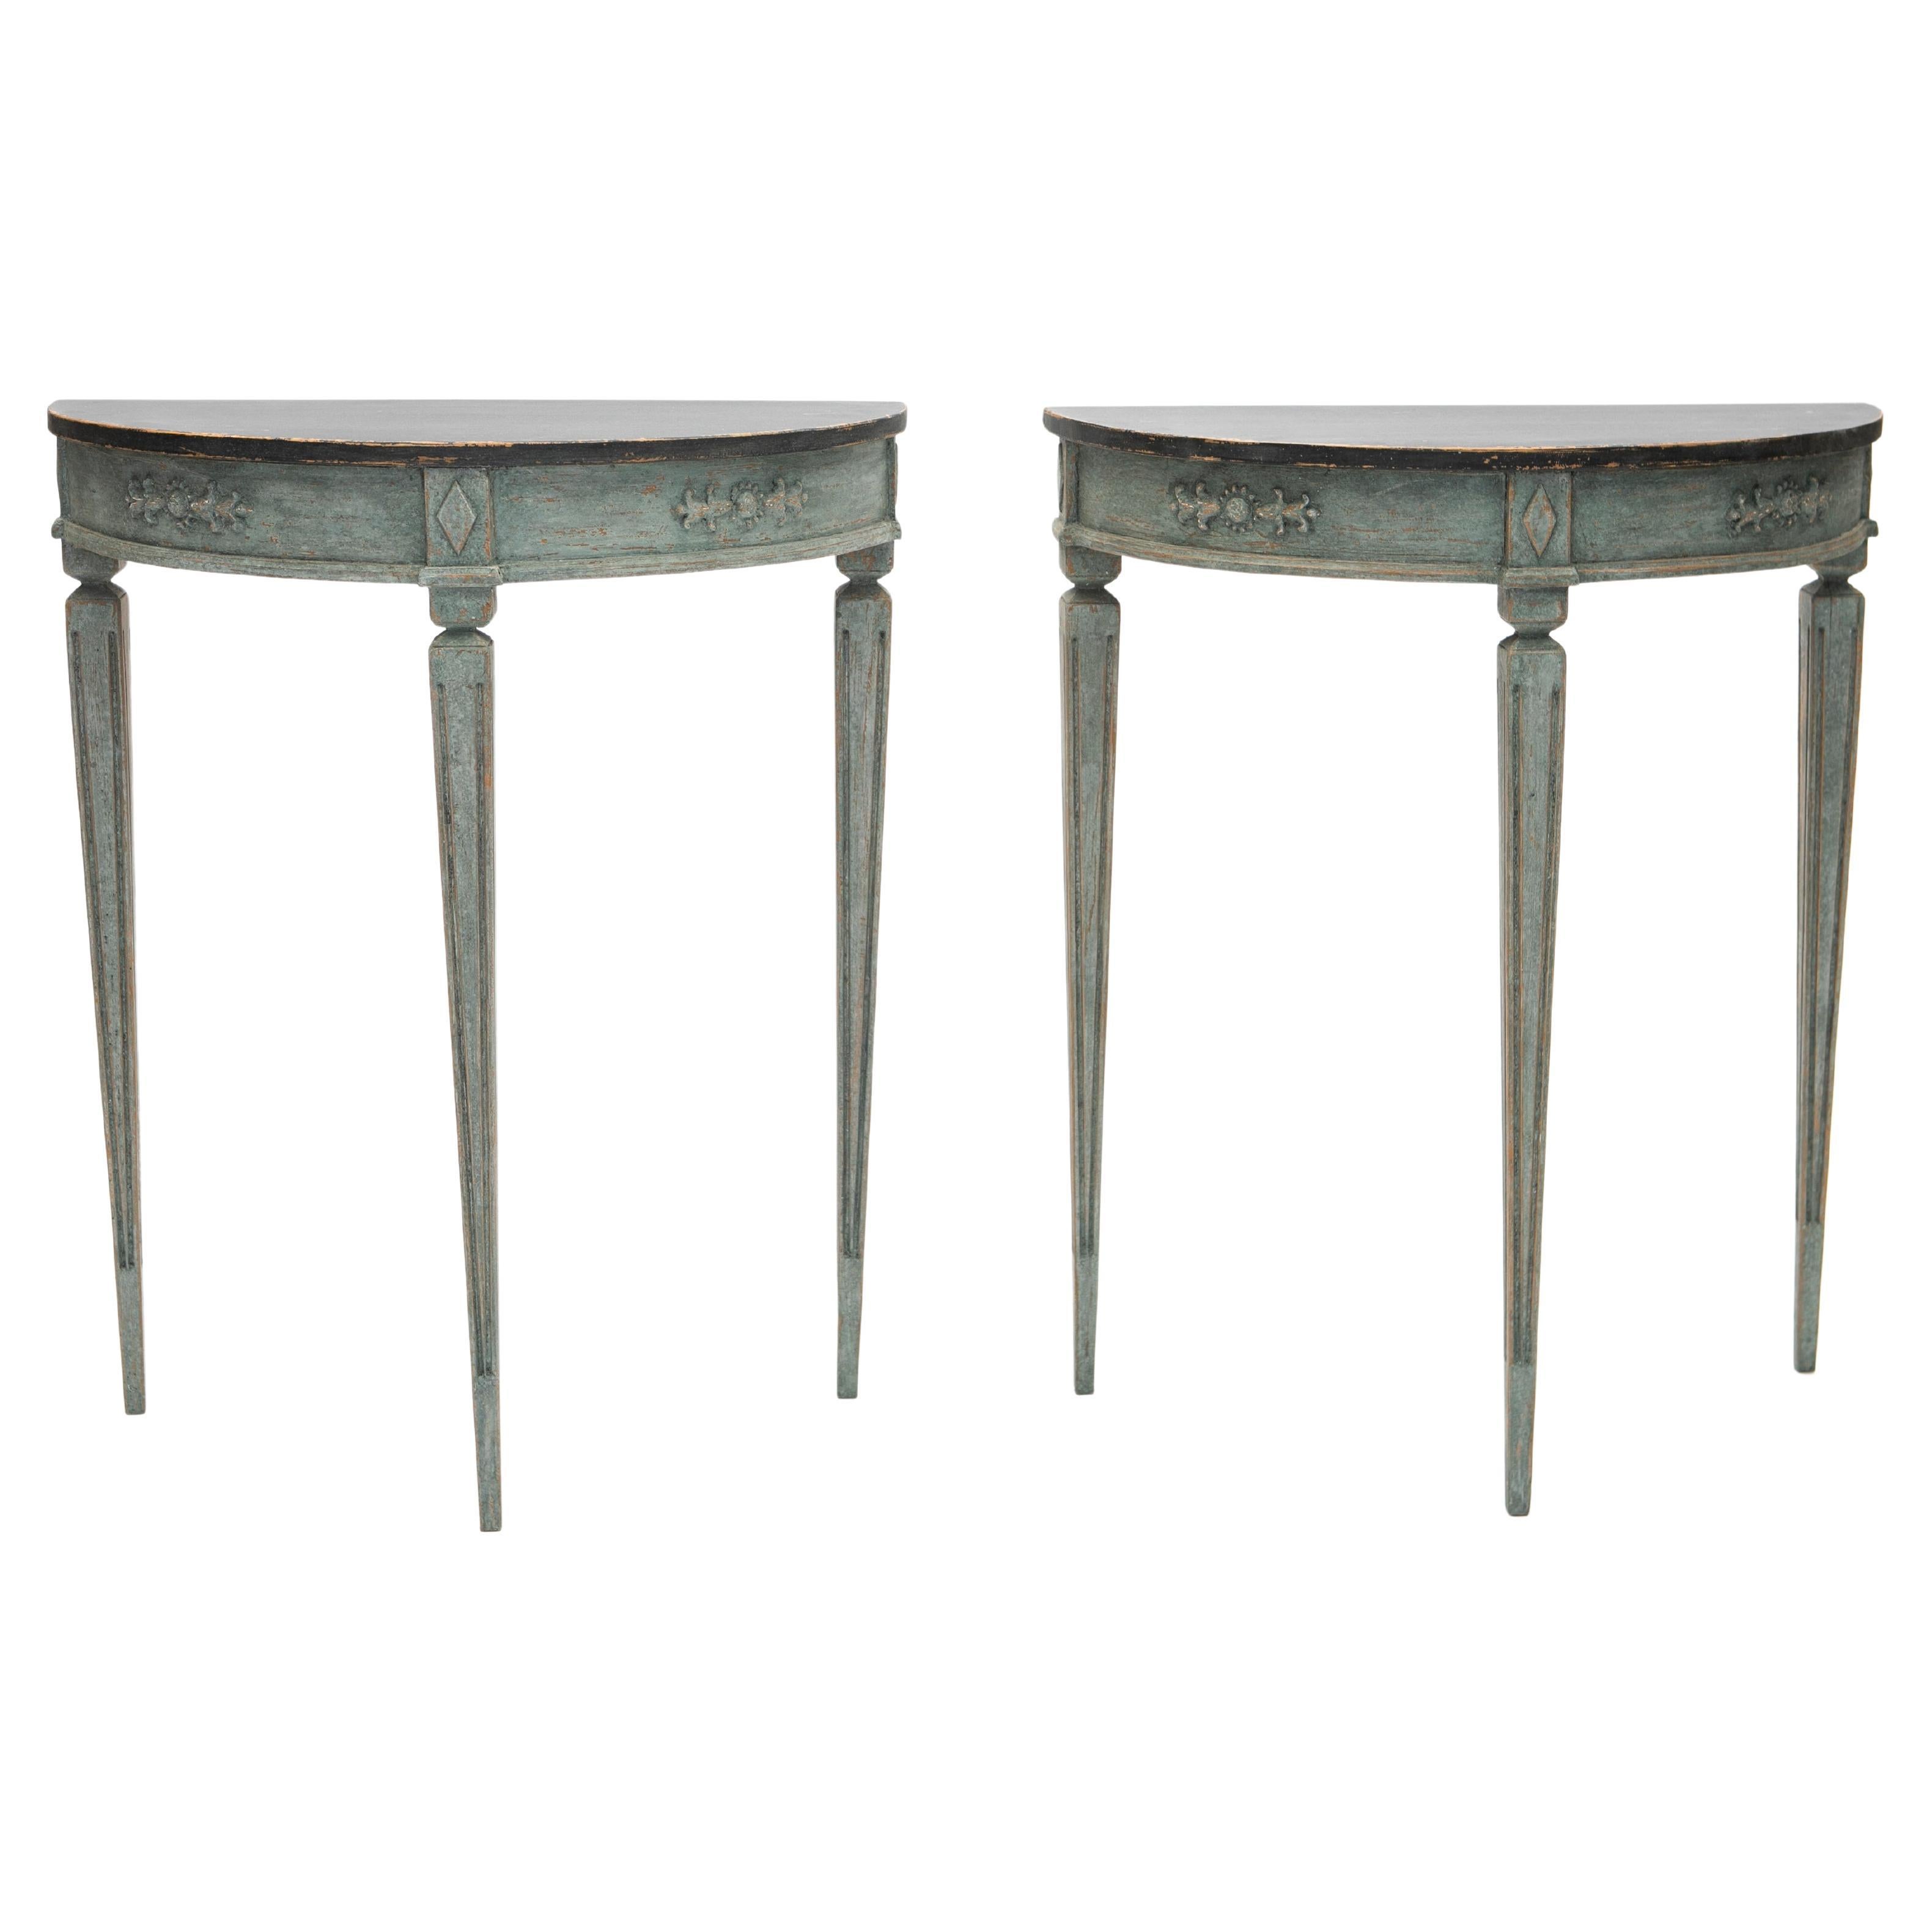 Pair of Demilune Console Tables, Gustavian Style